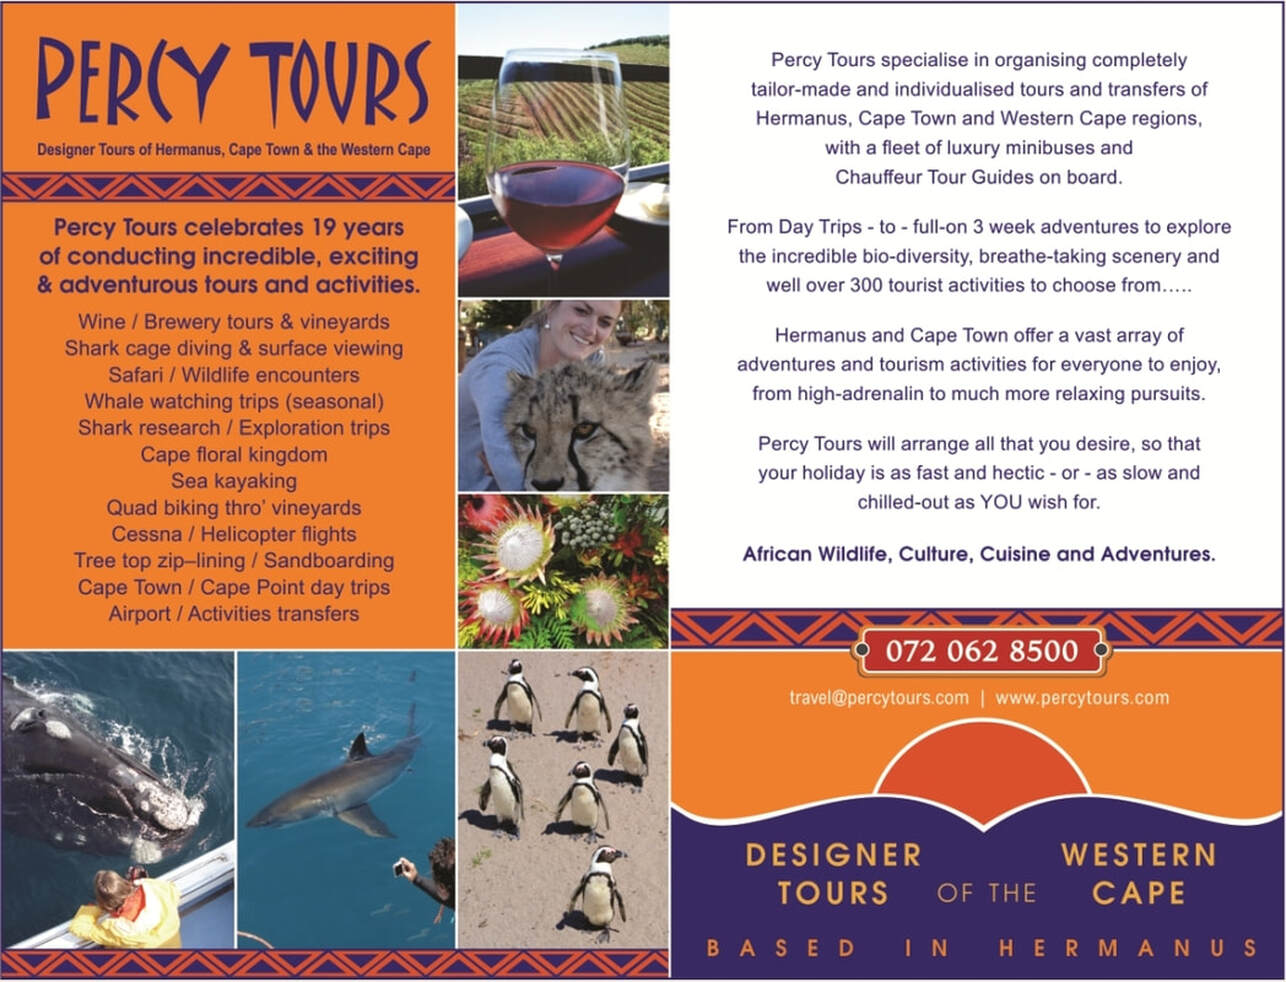 Percy Tours Hermanus, designer tours of Hermanus, Cape Town and the Western Cape South Africa